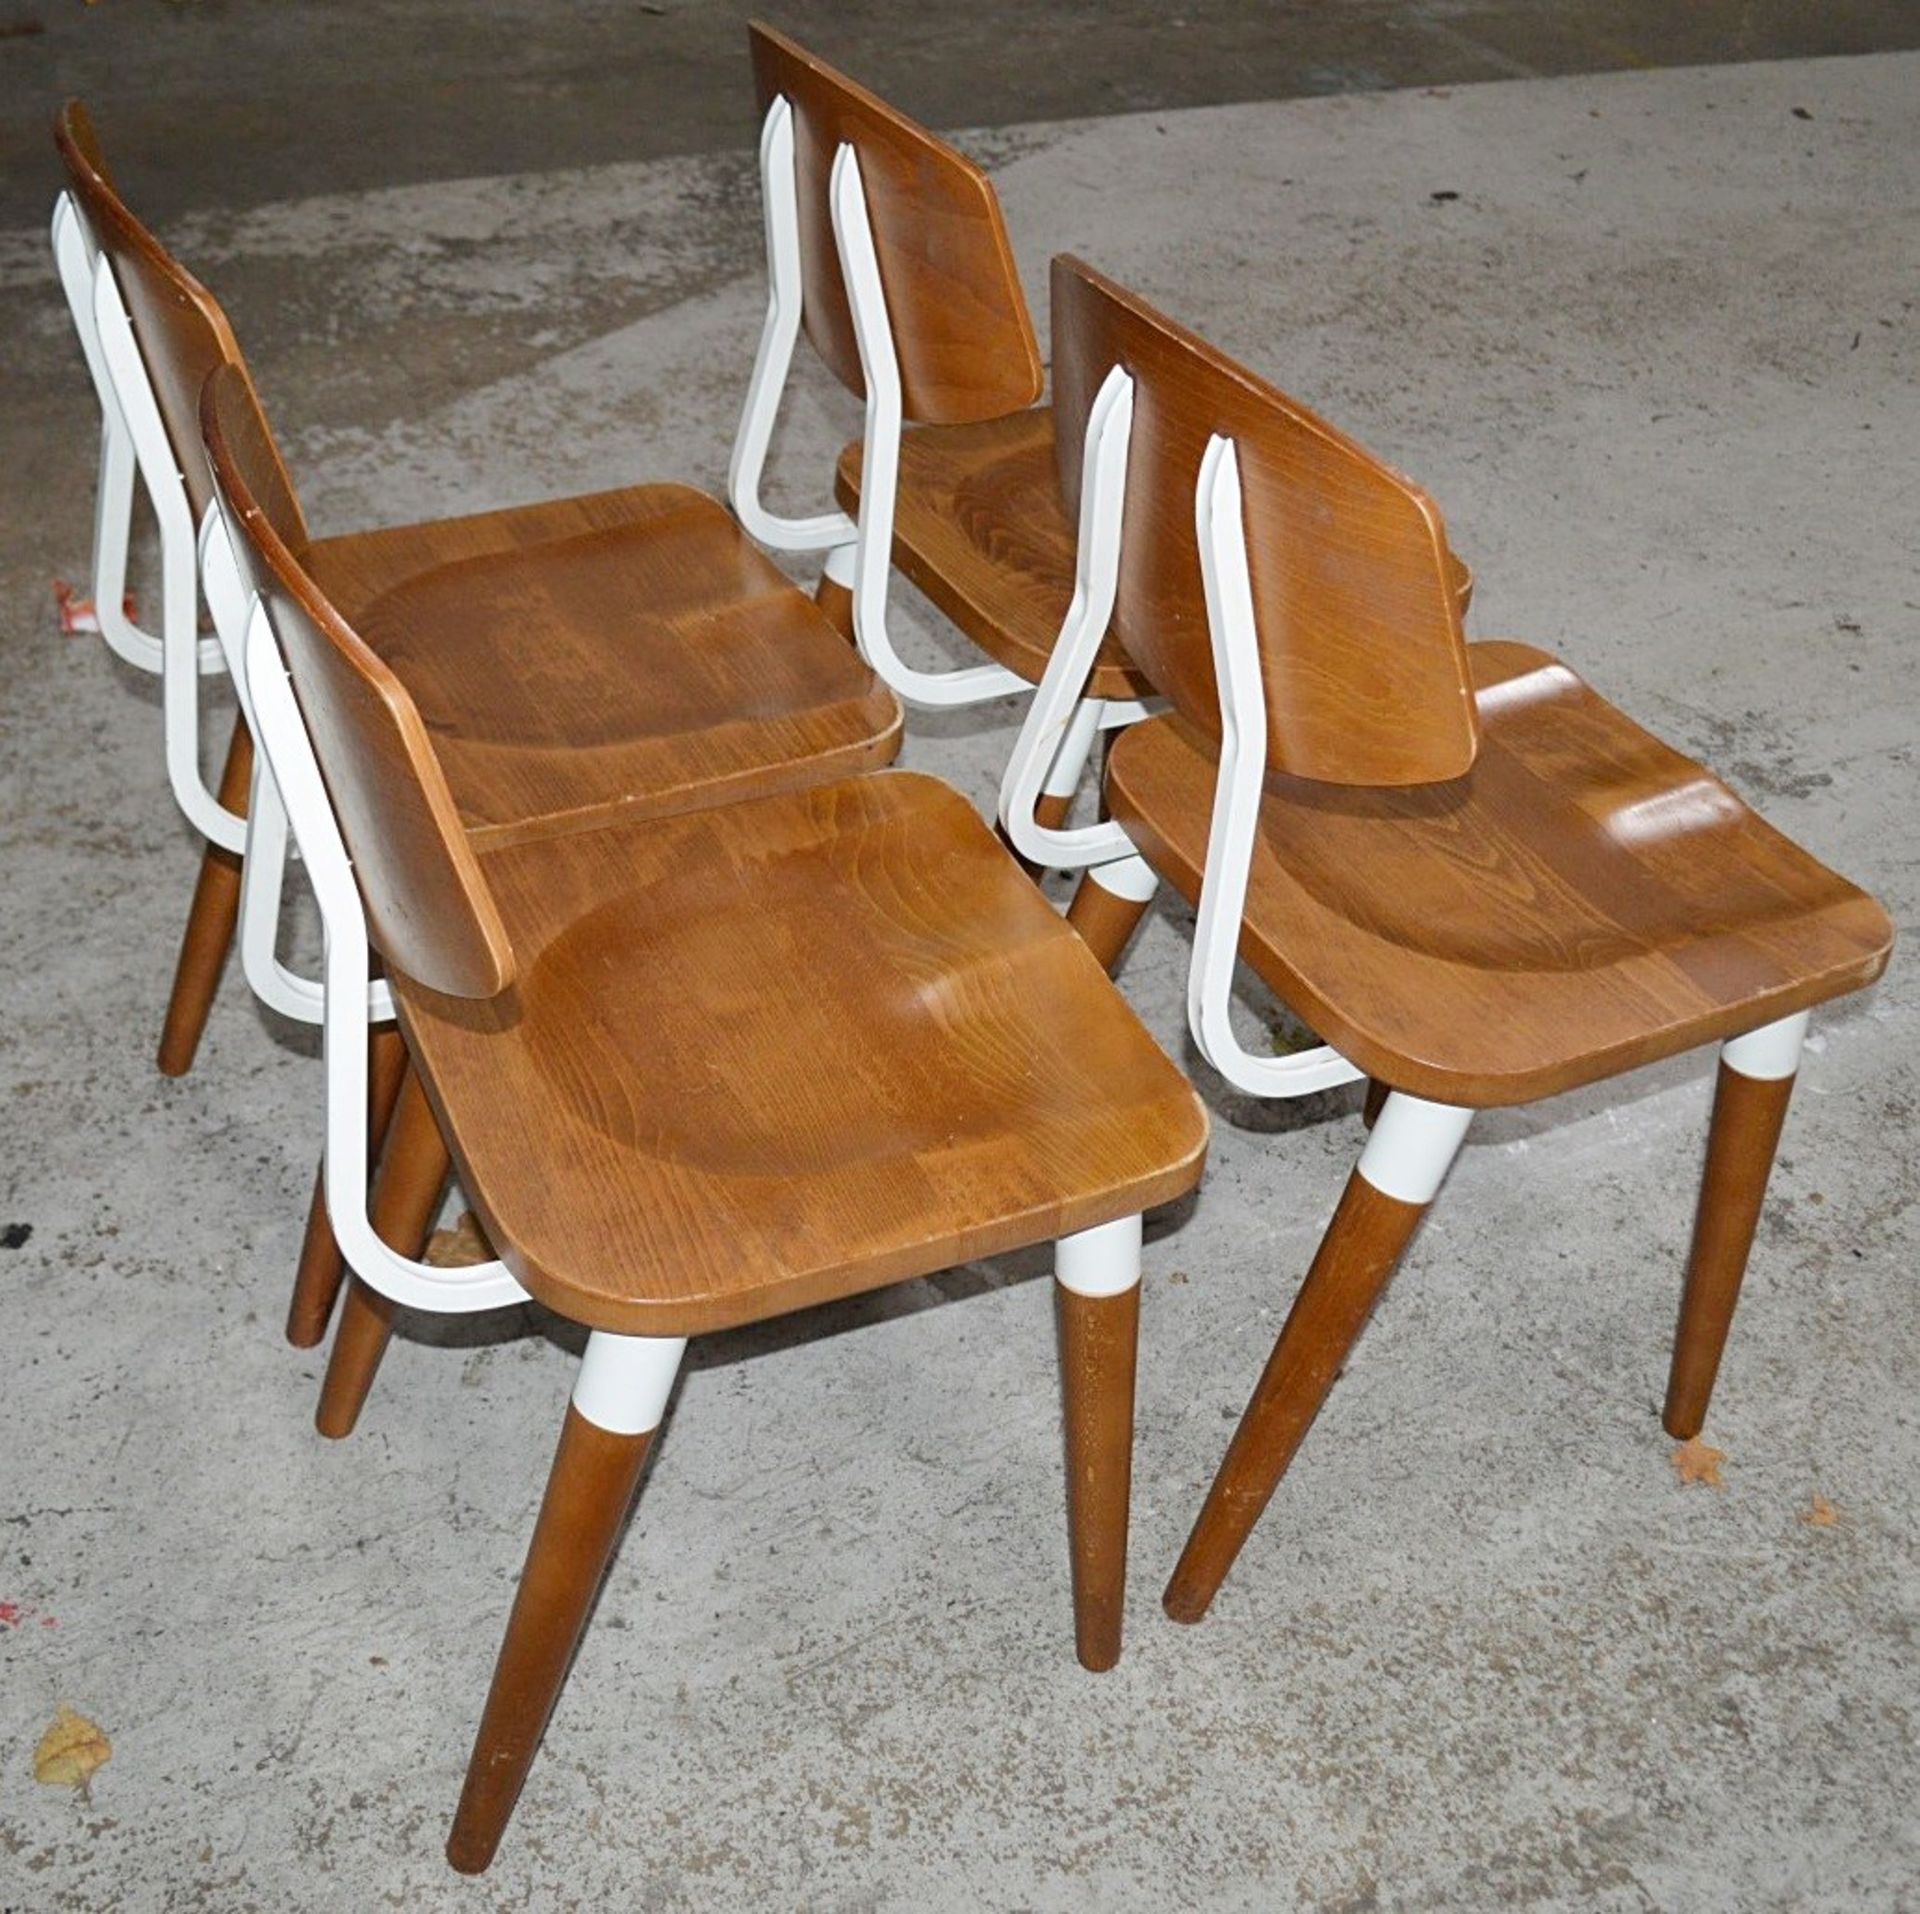 8 x Contemporary Commercial Dining Chairs With A Sturdy Wood And Metal Construction - Image 7 of 9